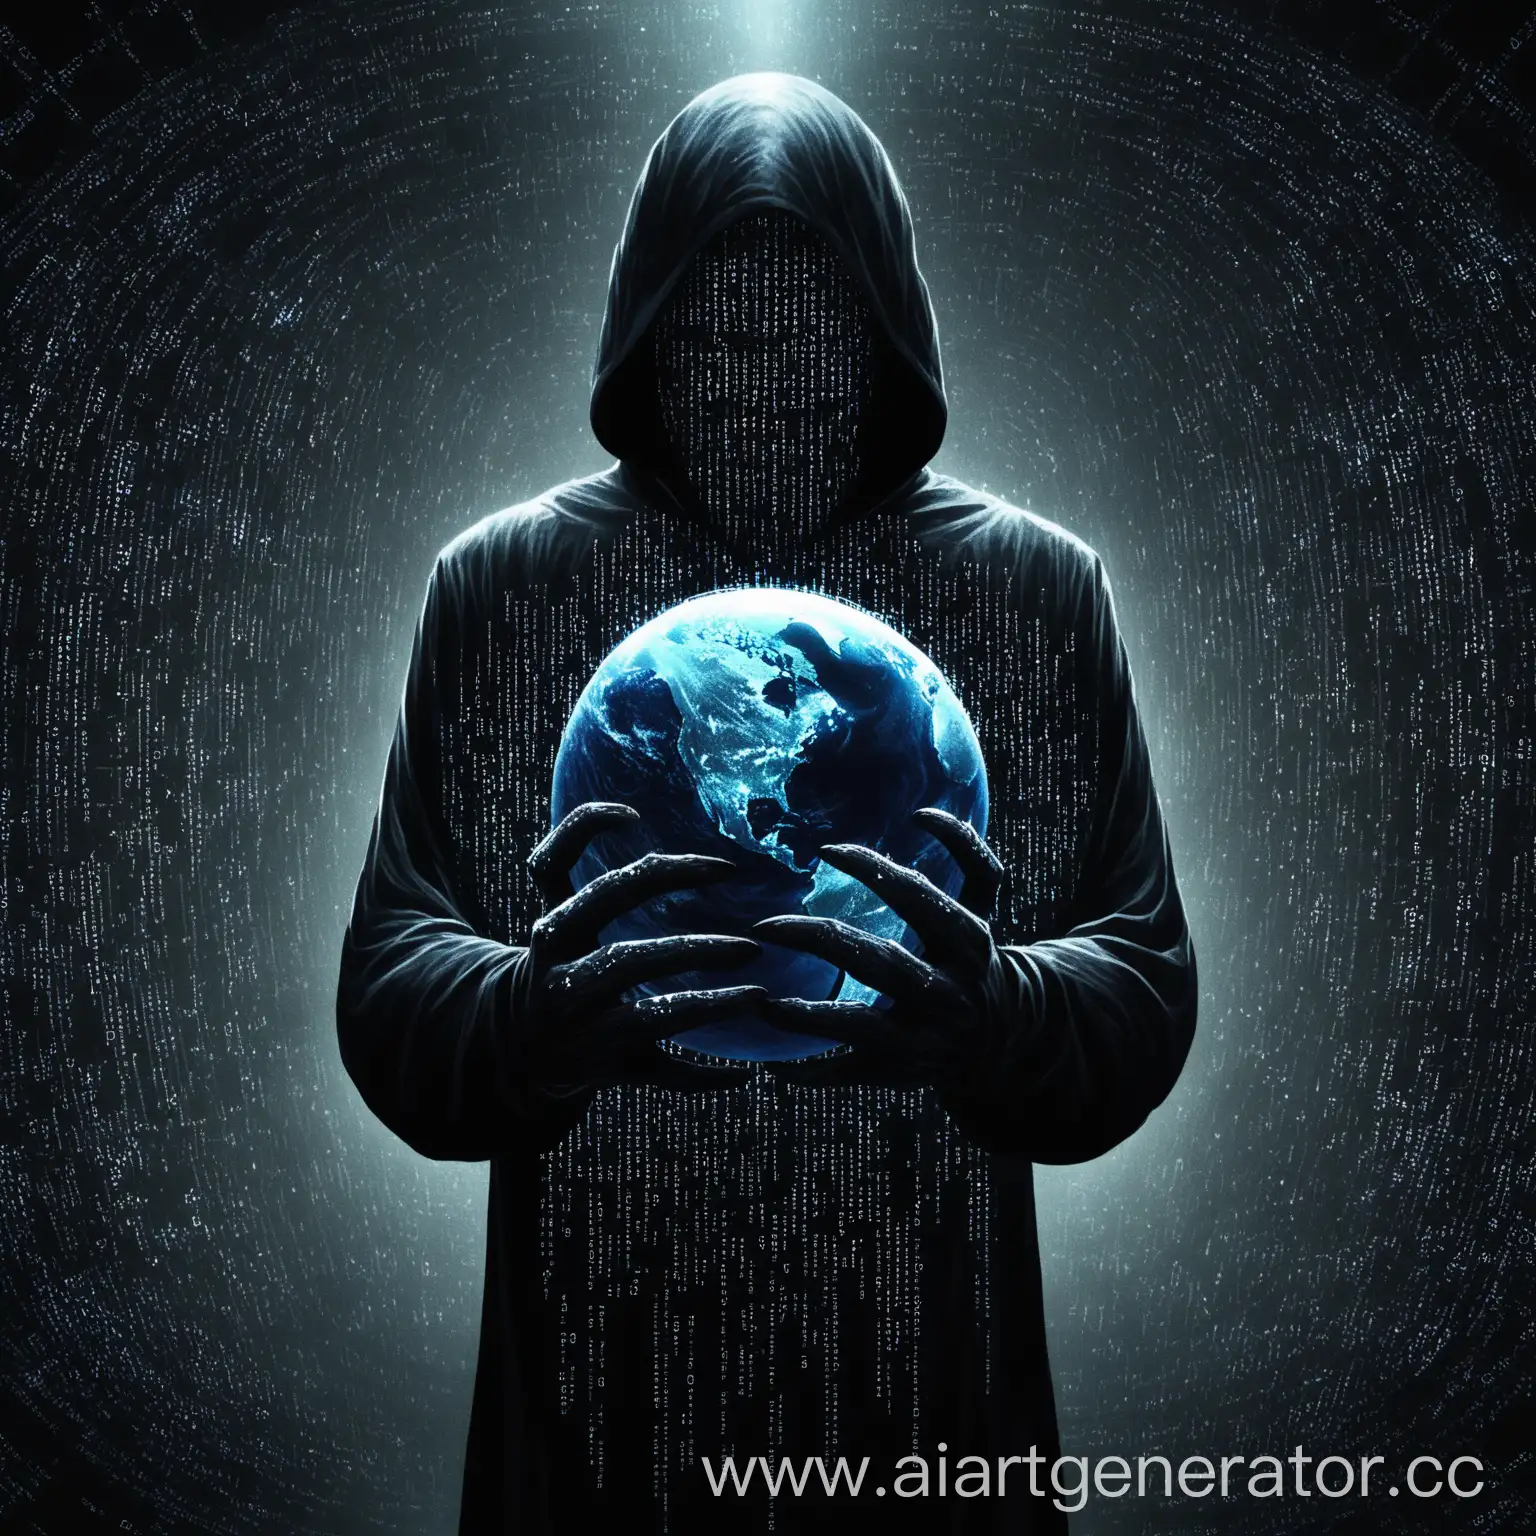 a very dark creature does not look like a human being holding the Earth with his hands and around him particles of codes like hackers